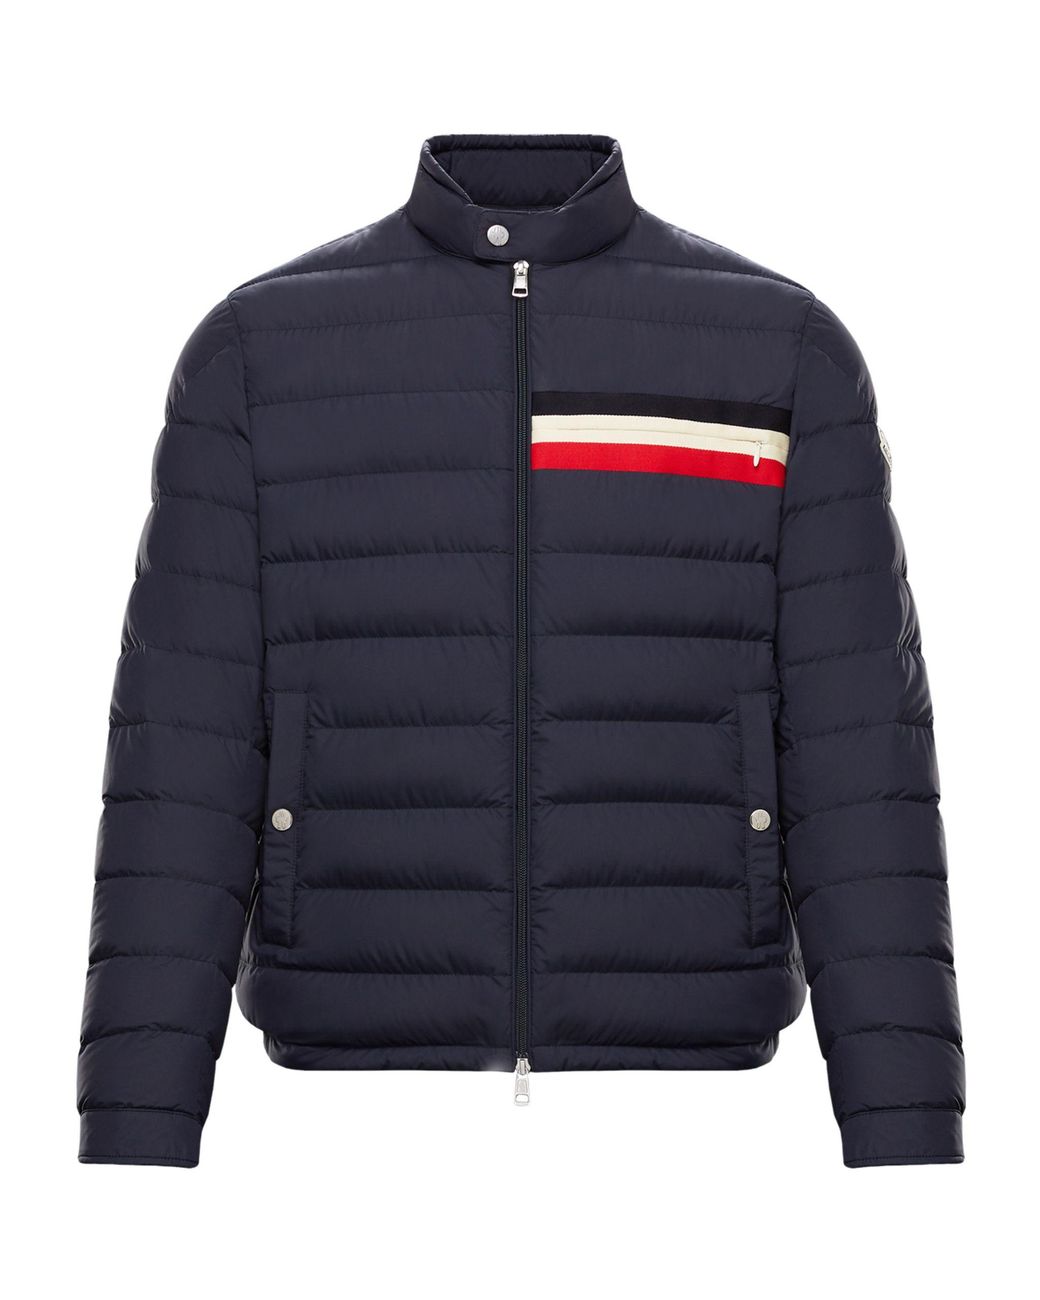 Moncler Synthetic Yeres Down Jacket in Blue for Men - Lyst